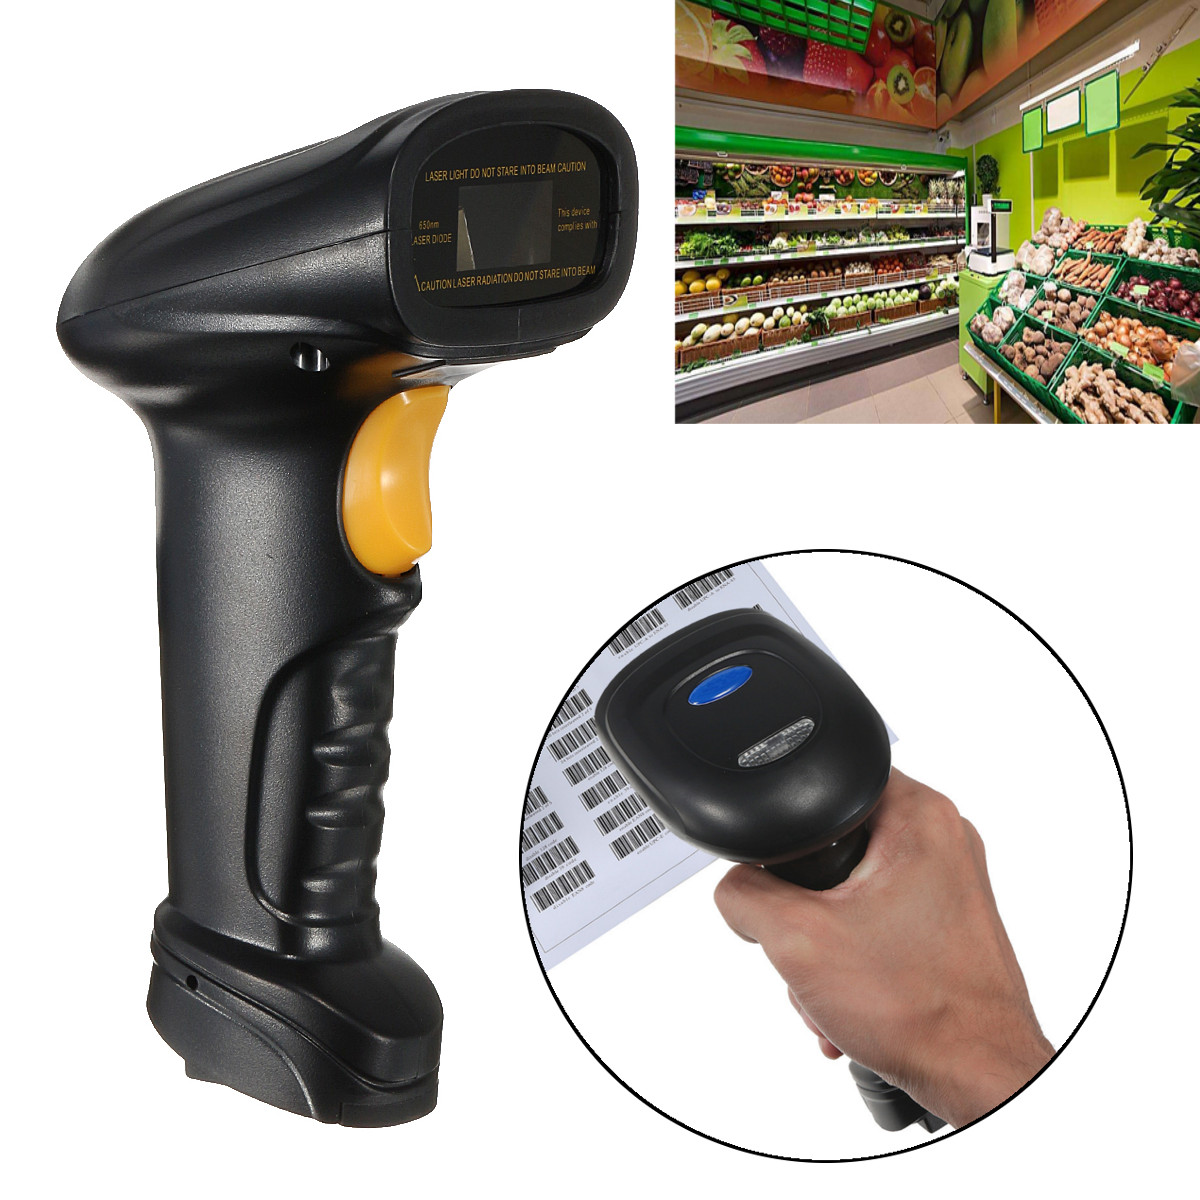 

Wireless USB Bluetooth Barcode Scanner Pos Label Reader for IOS Android Windows